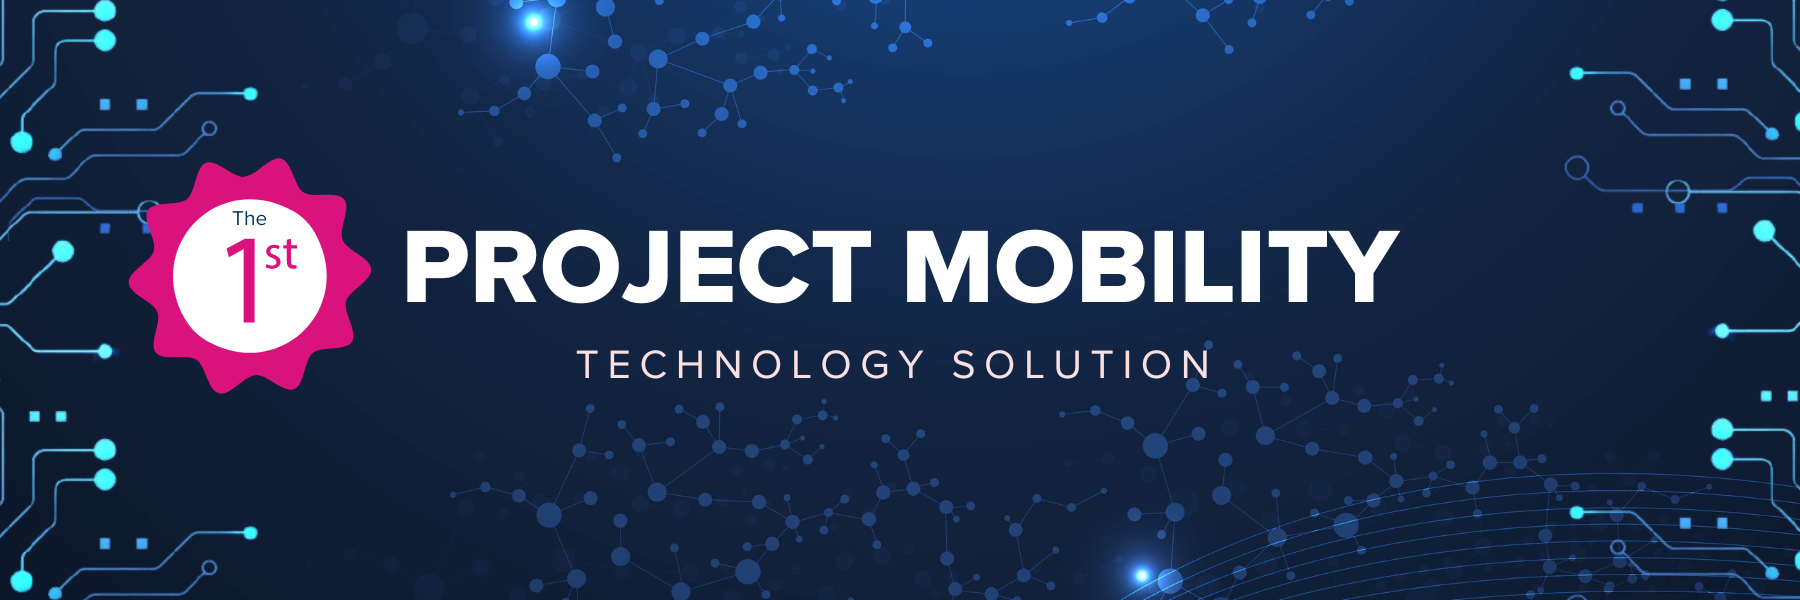 Project Mobility